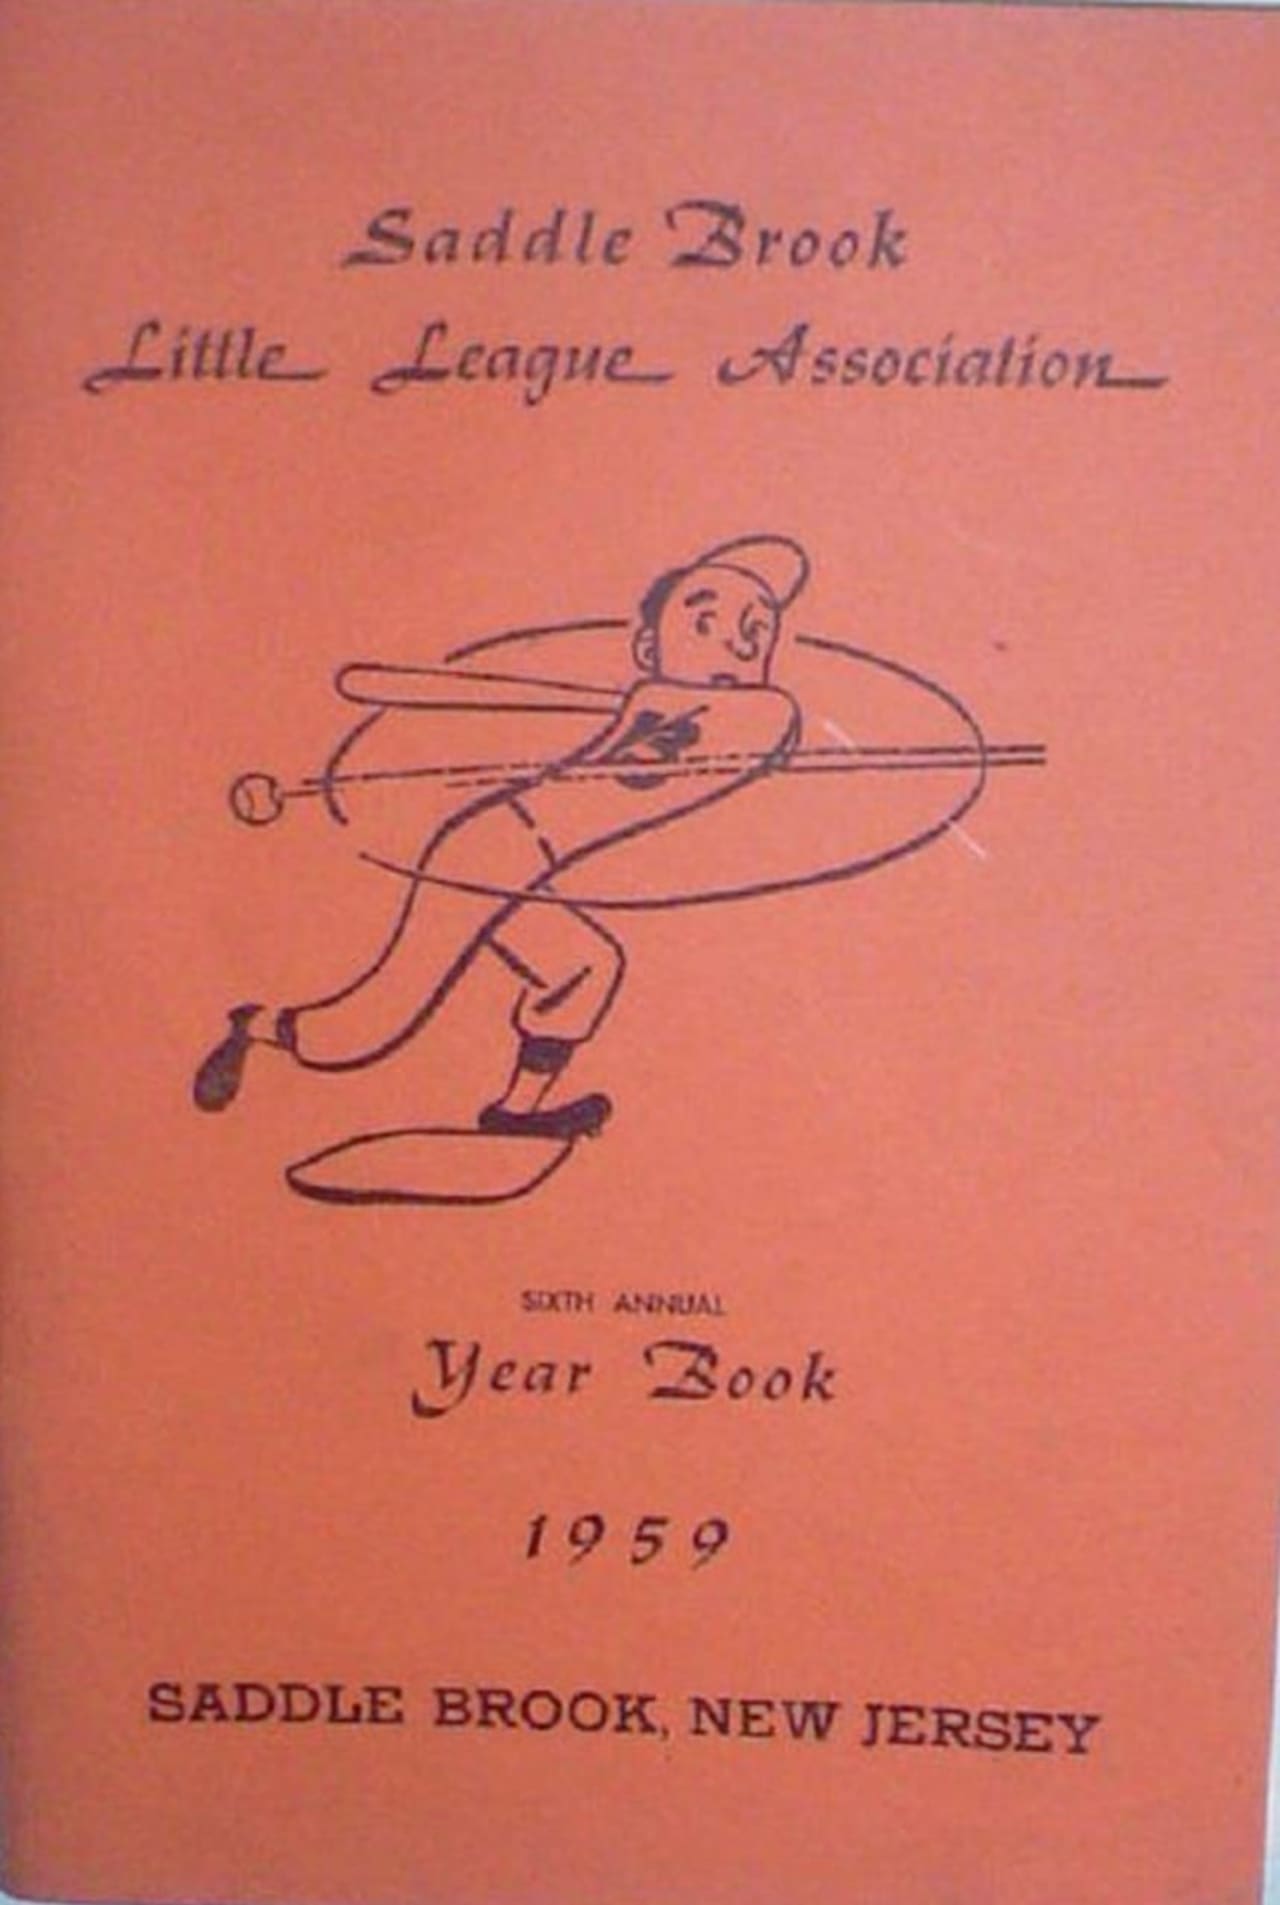 The SBLL posted a picture of this 57-year-old yearbook, just in time for baseball season.